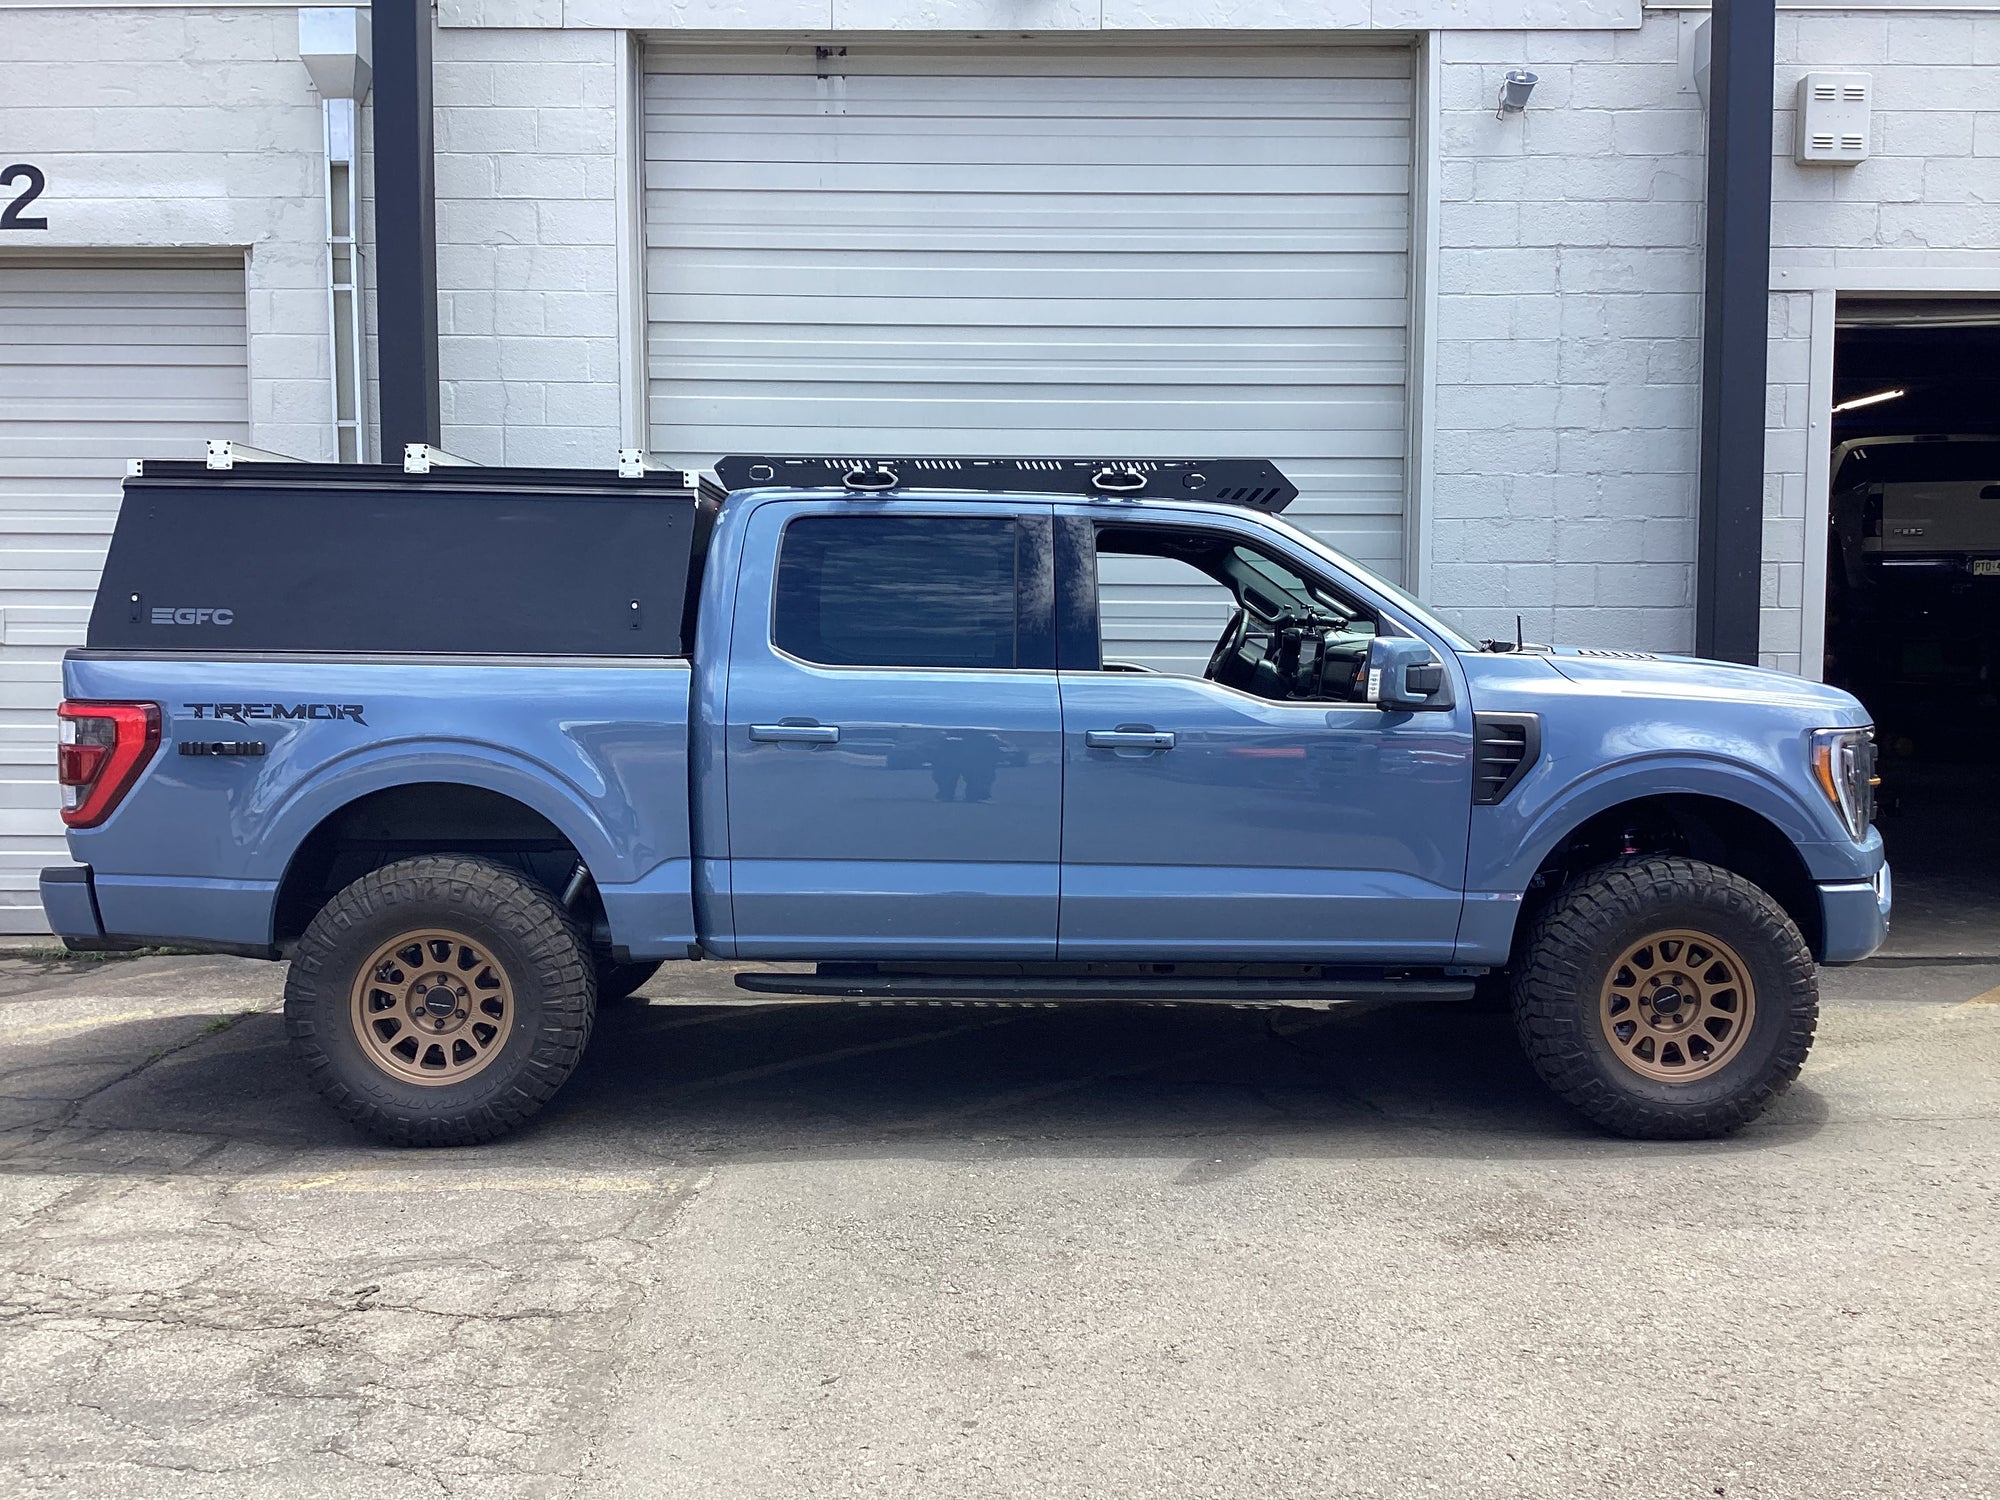 2023 Ford F150 Topper - Build #307